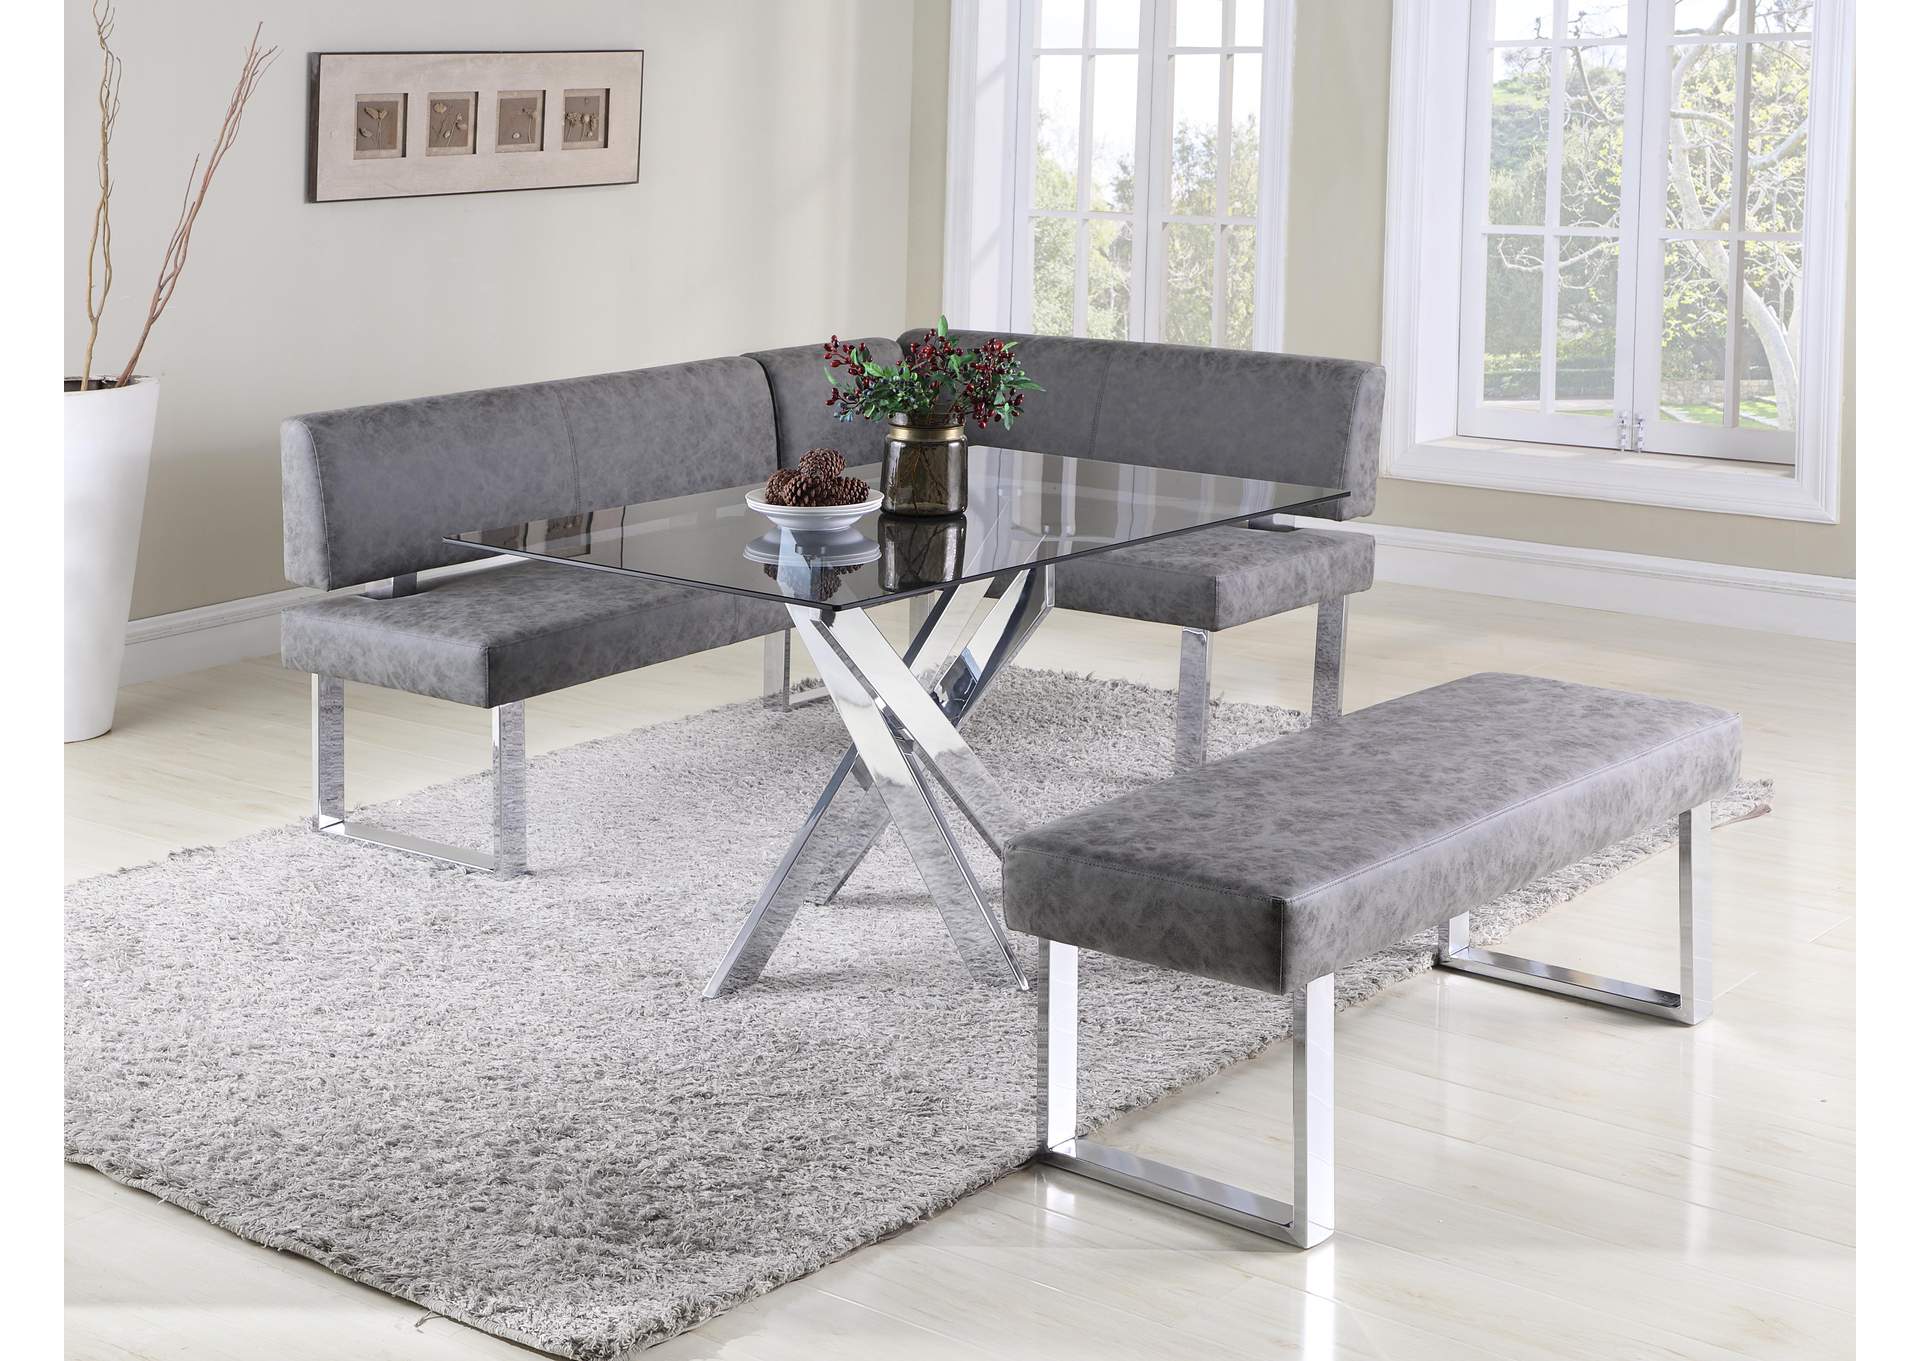 Genevieve Modern Dining Set w/ Glass Top Table, Upholstered Nook & Bench,Chintaly Imports